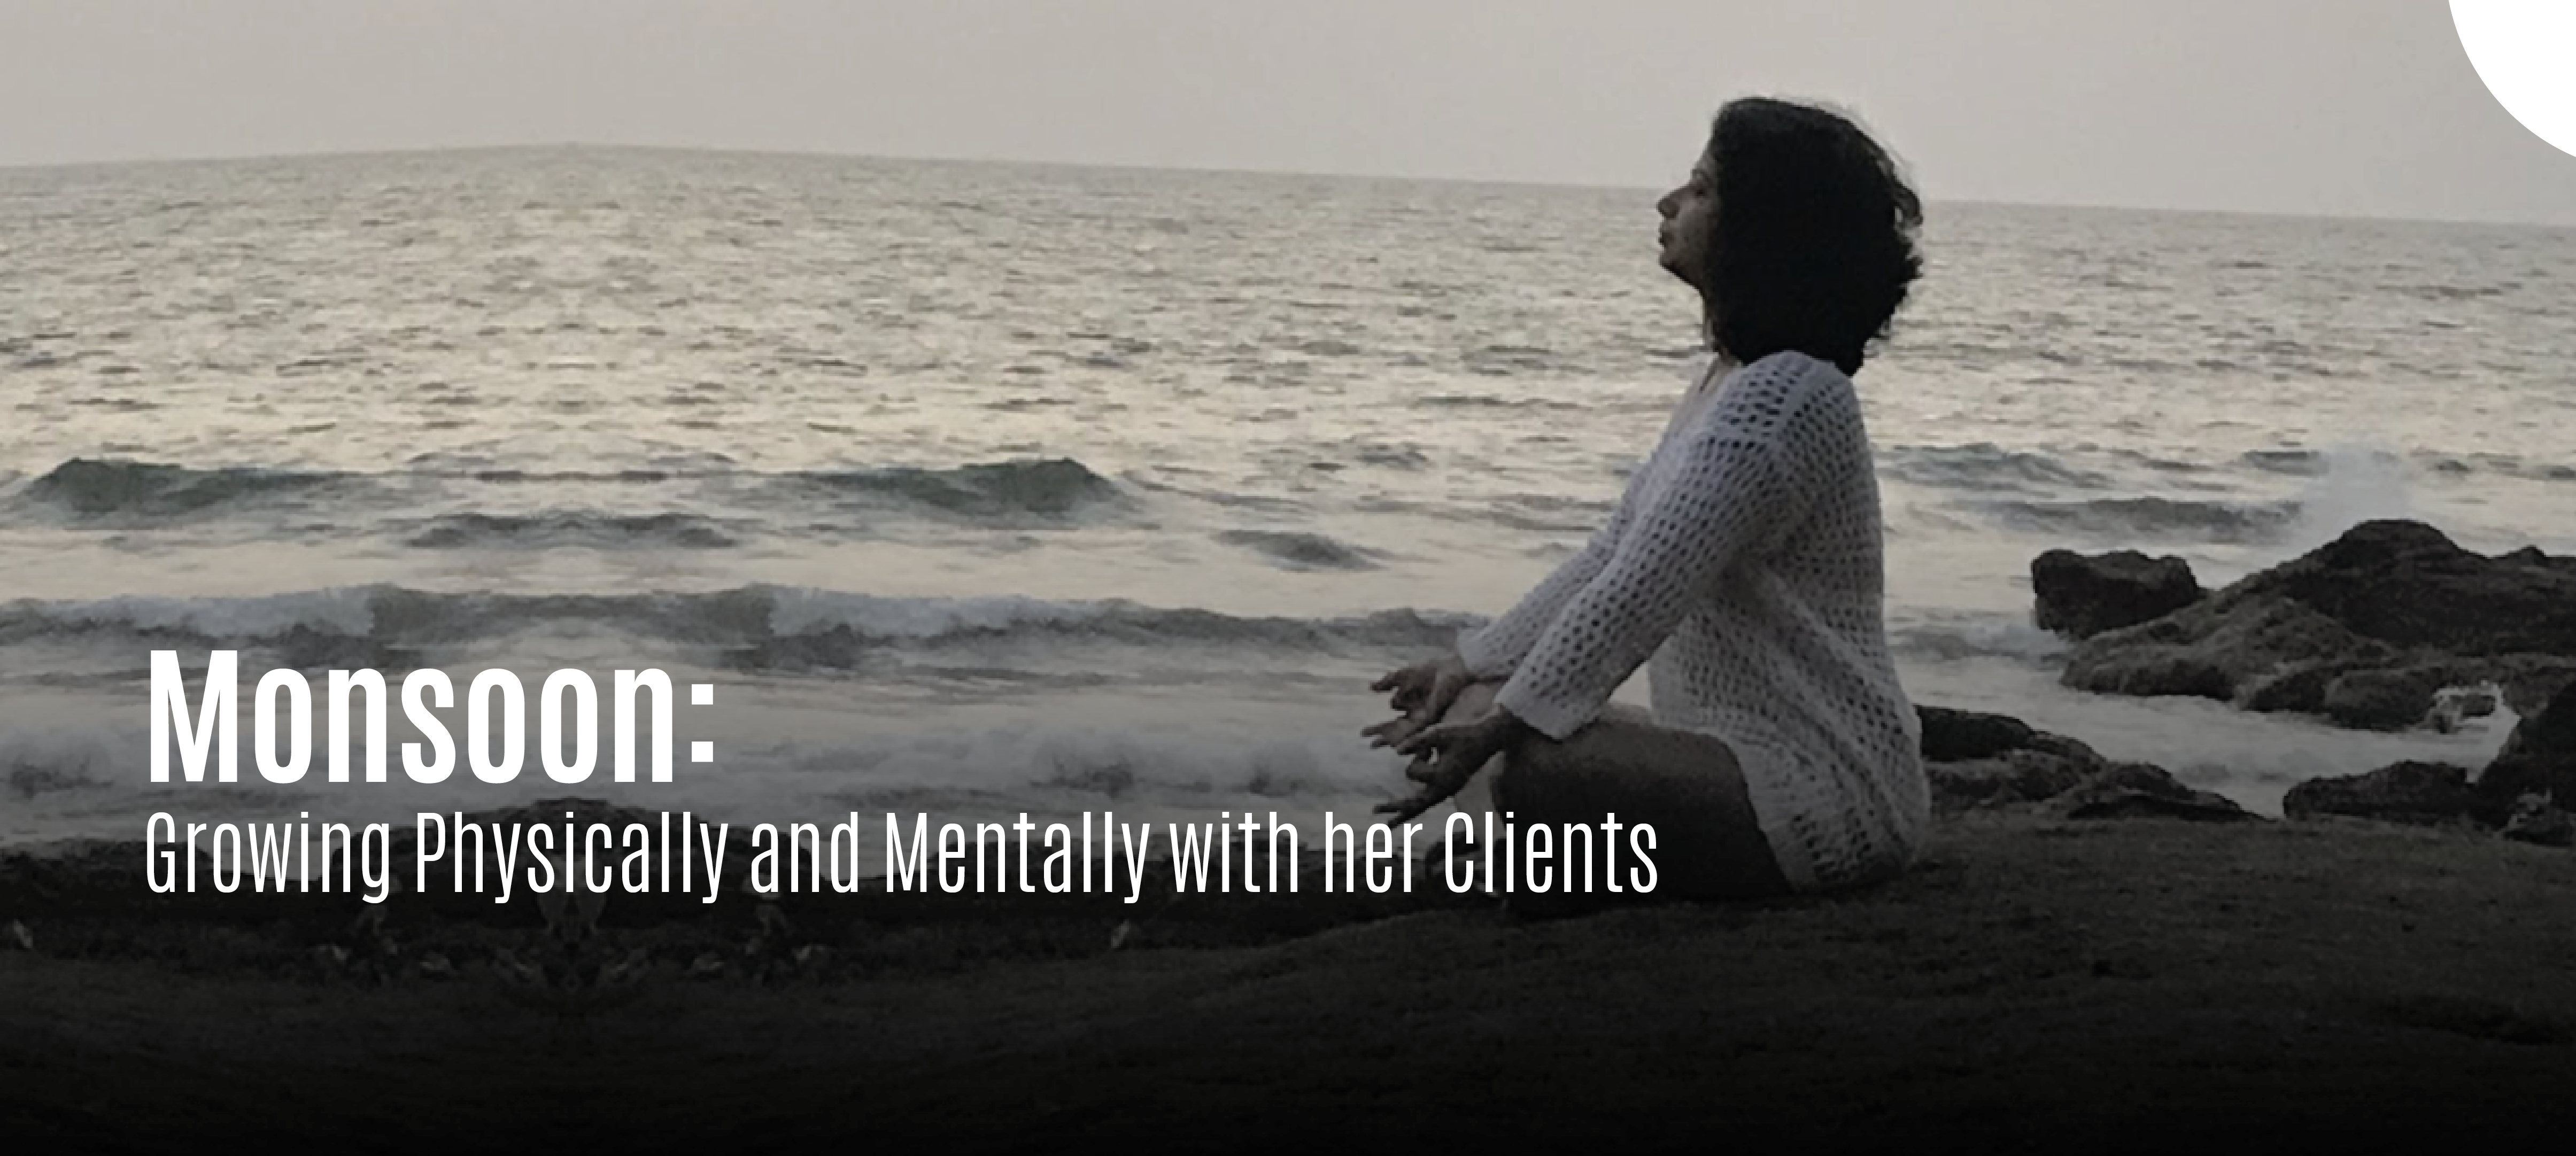 Monsoon's story is about impacted her clients' lives and vice versa. 